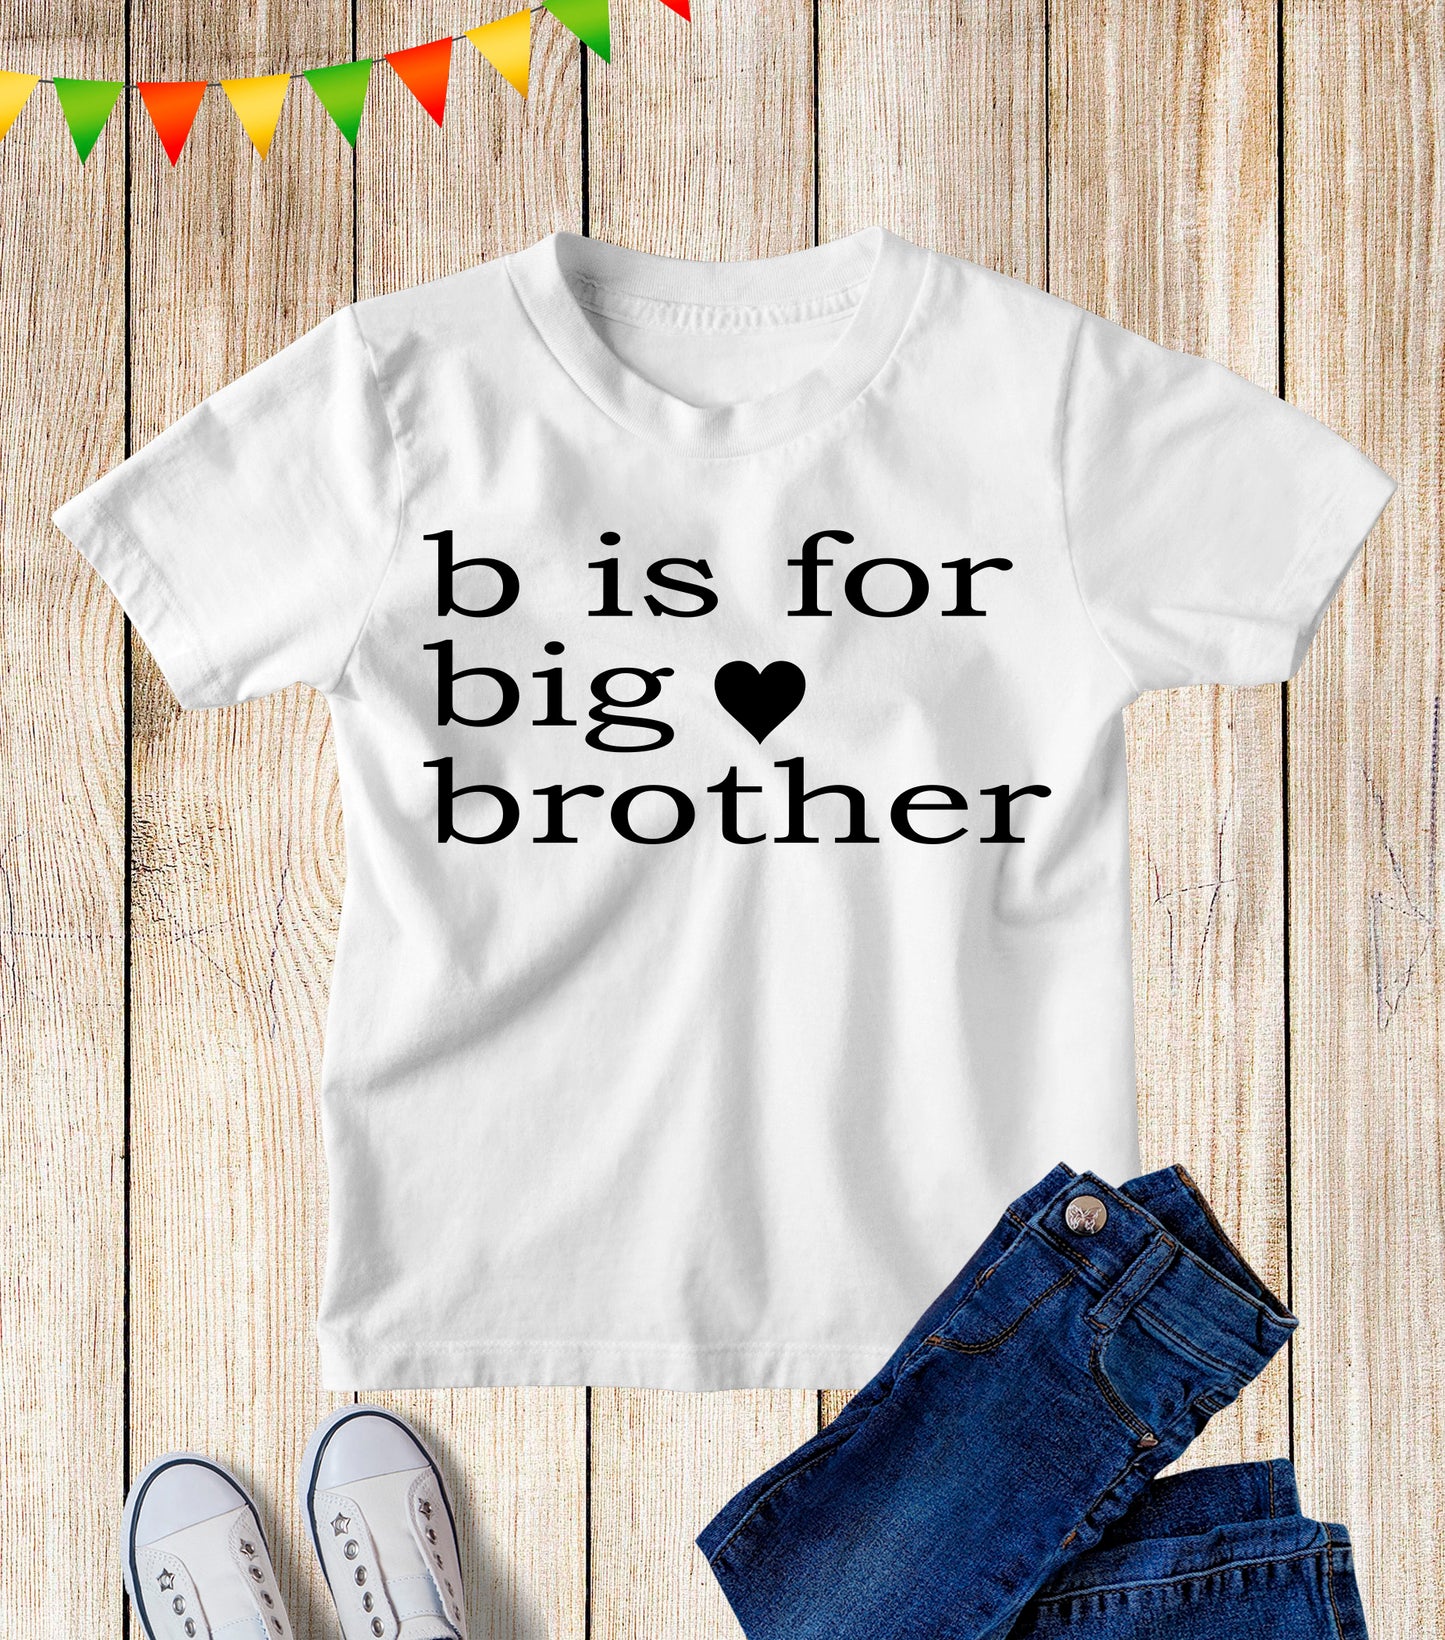 b is for Big brother Kids T Shirt